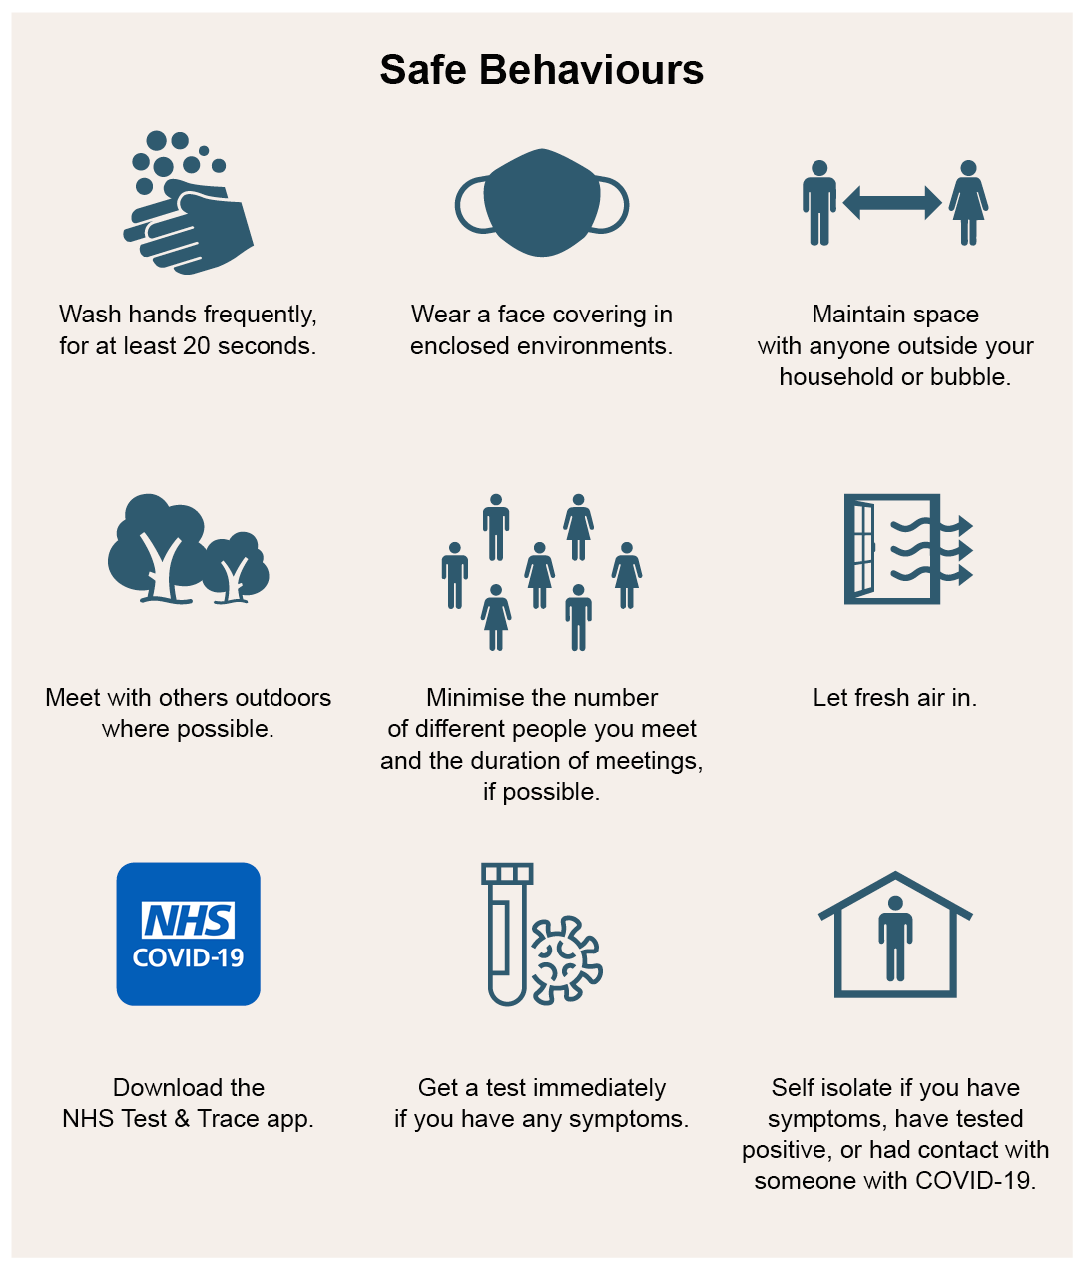 UK Government: How to Maintain Safe Behaviours